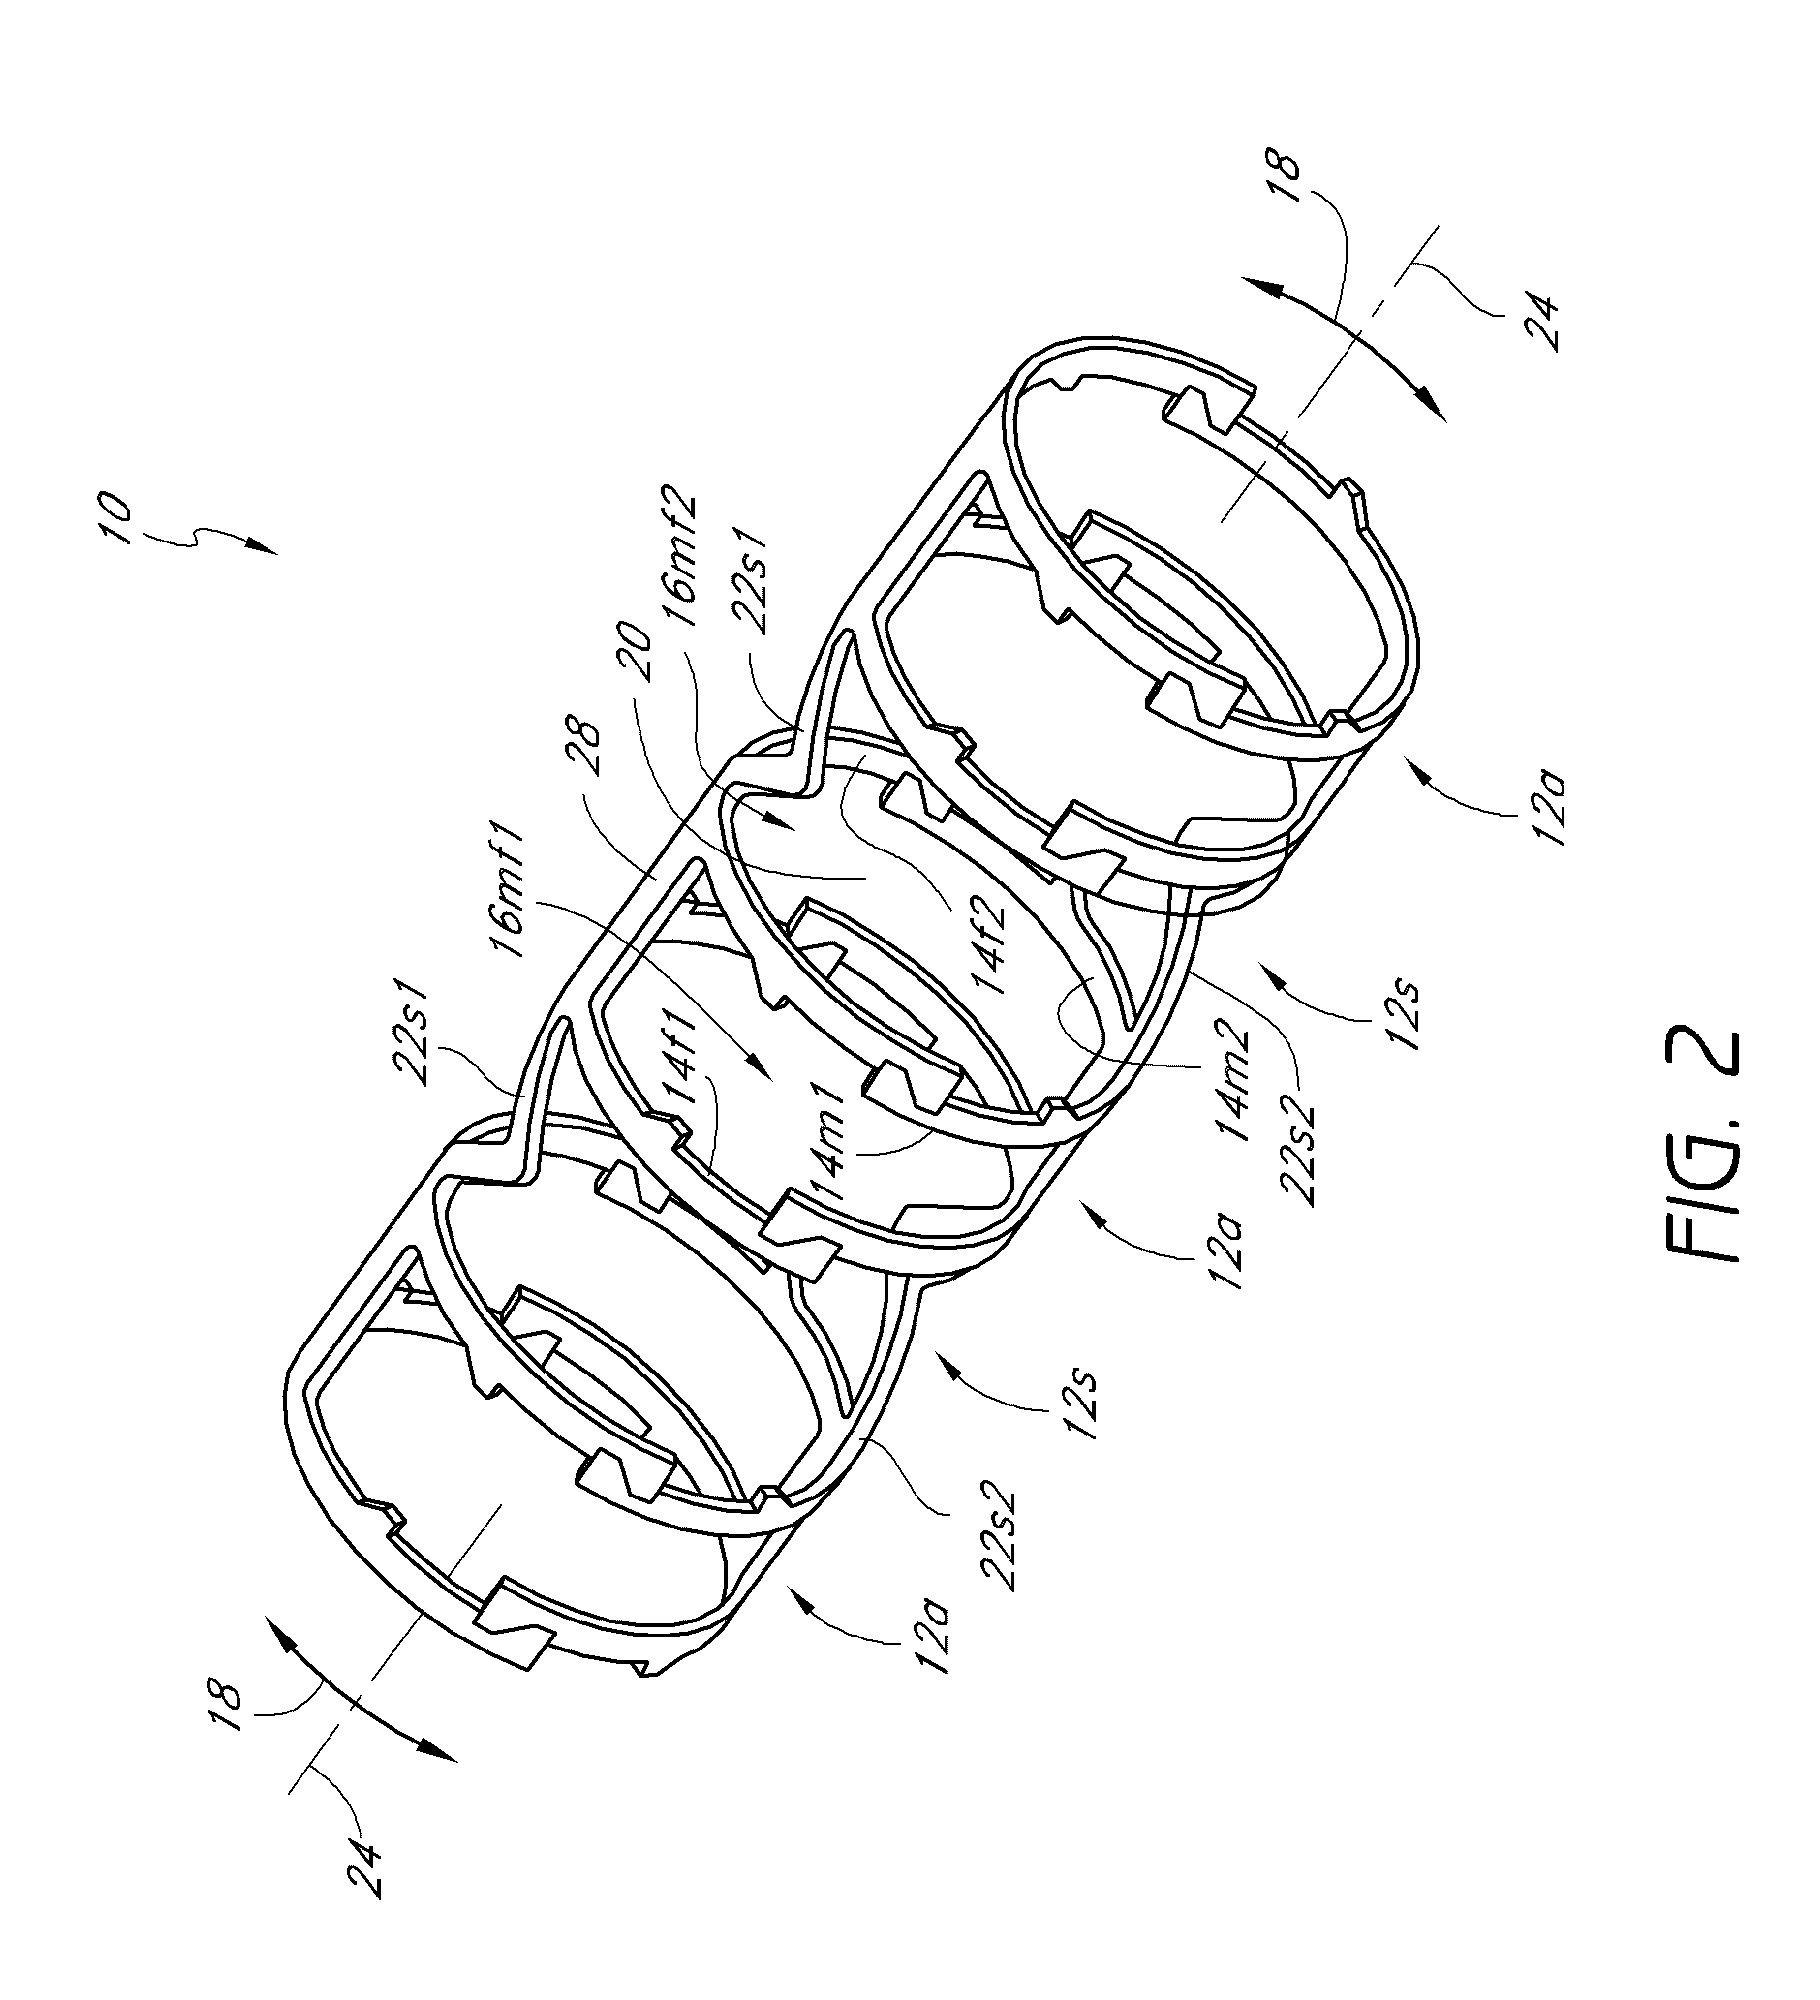 Axially nested slide and lock expandable device